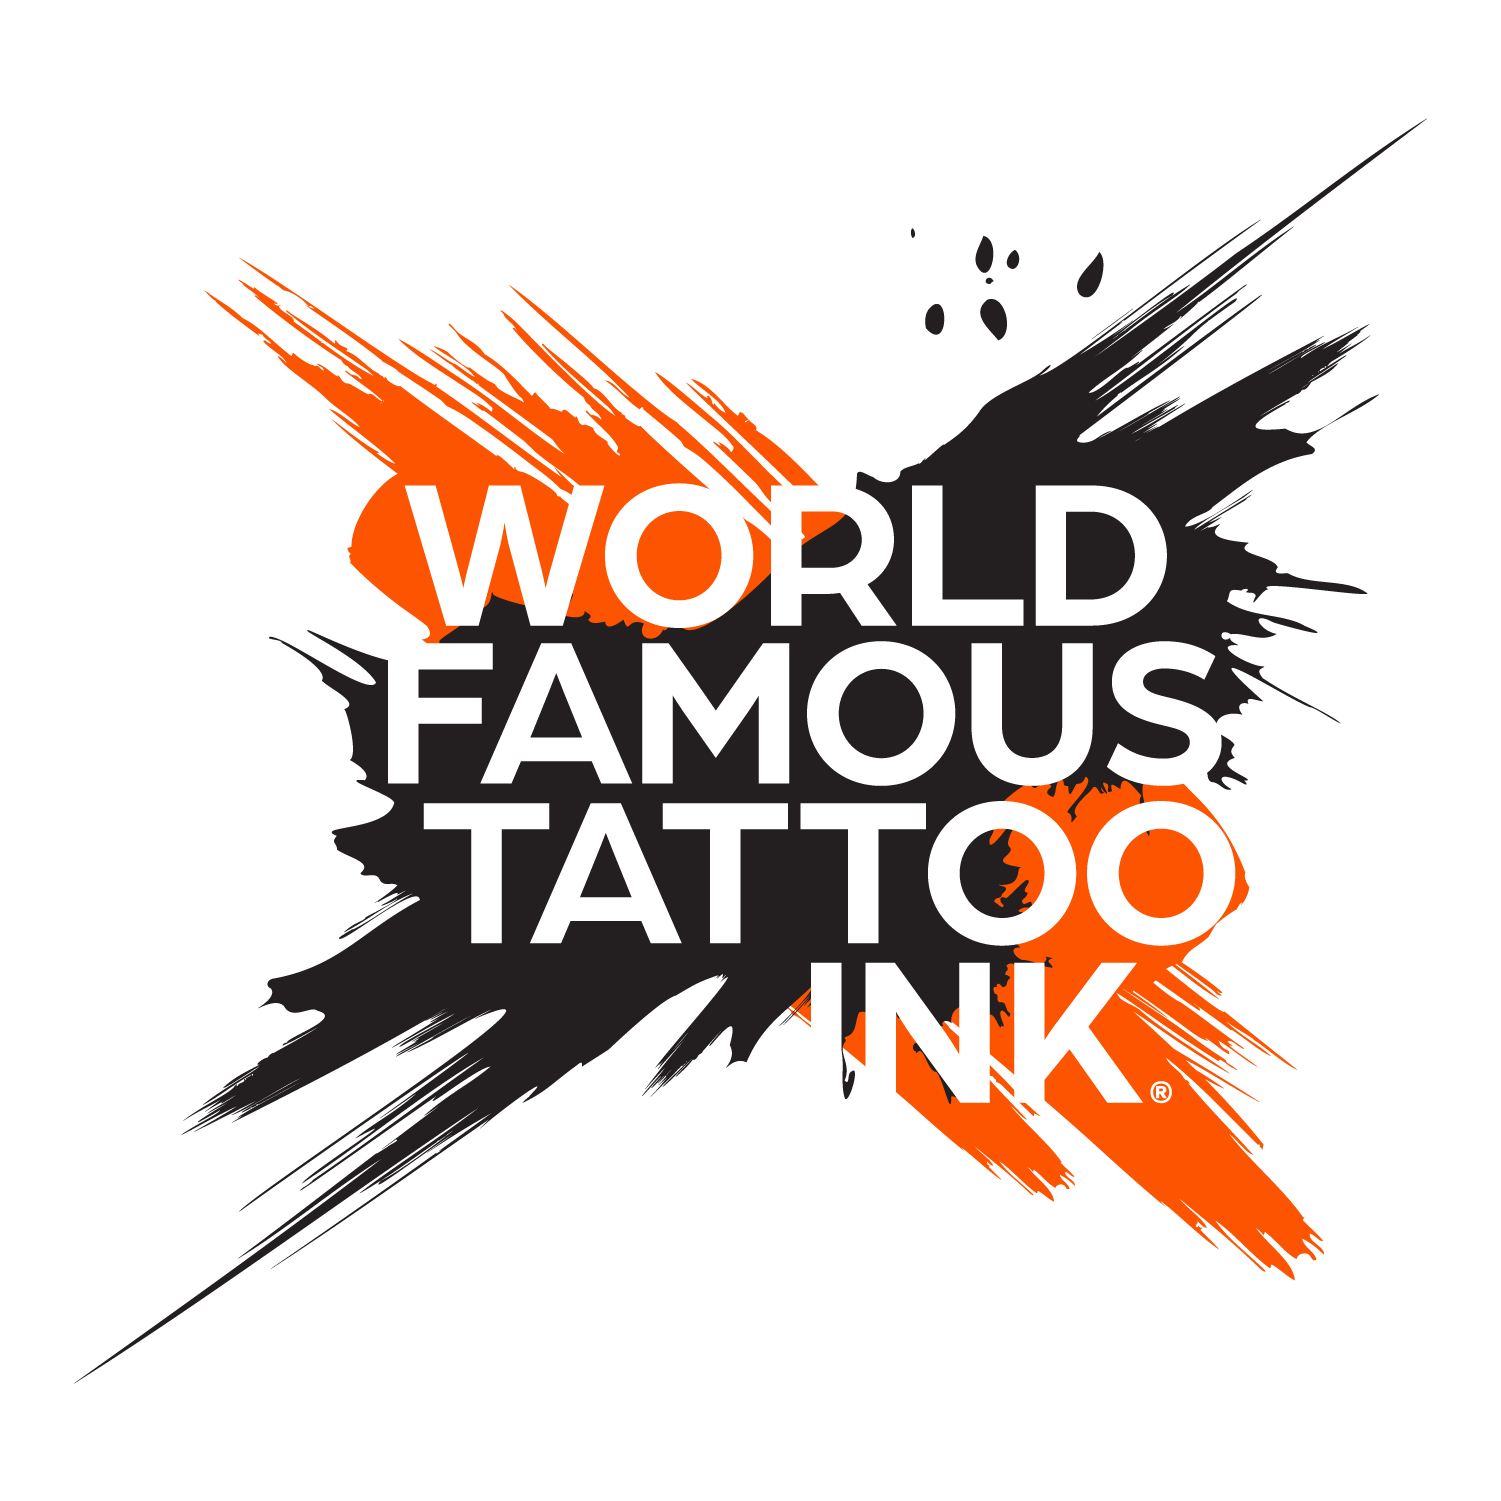 World Famous Tattoo Ink – 12 Color Skintone Set 1oz - Perpetual